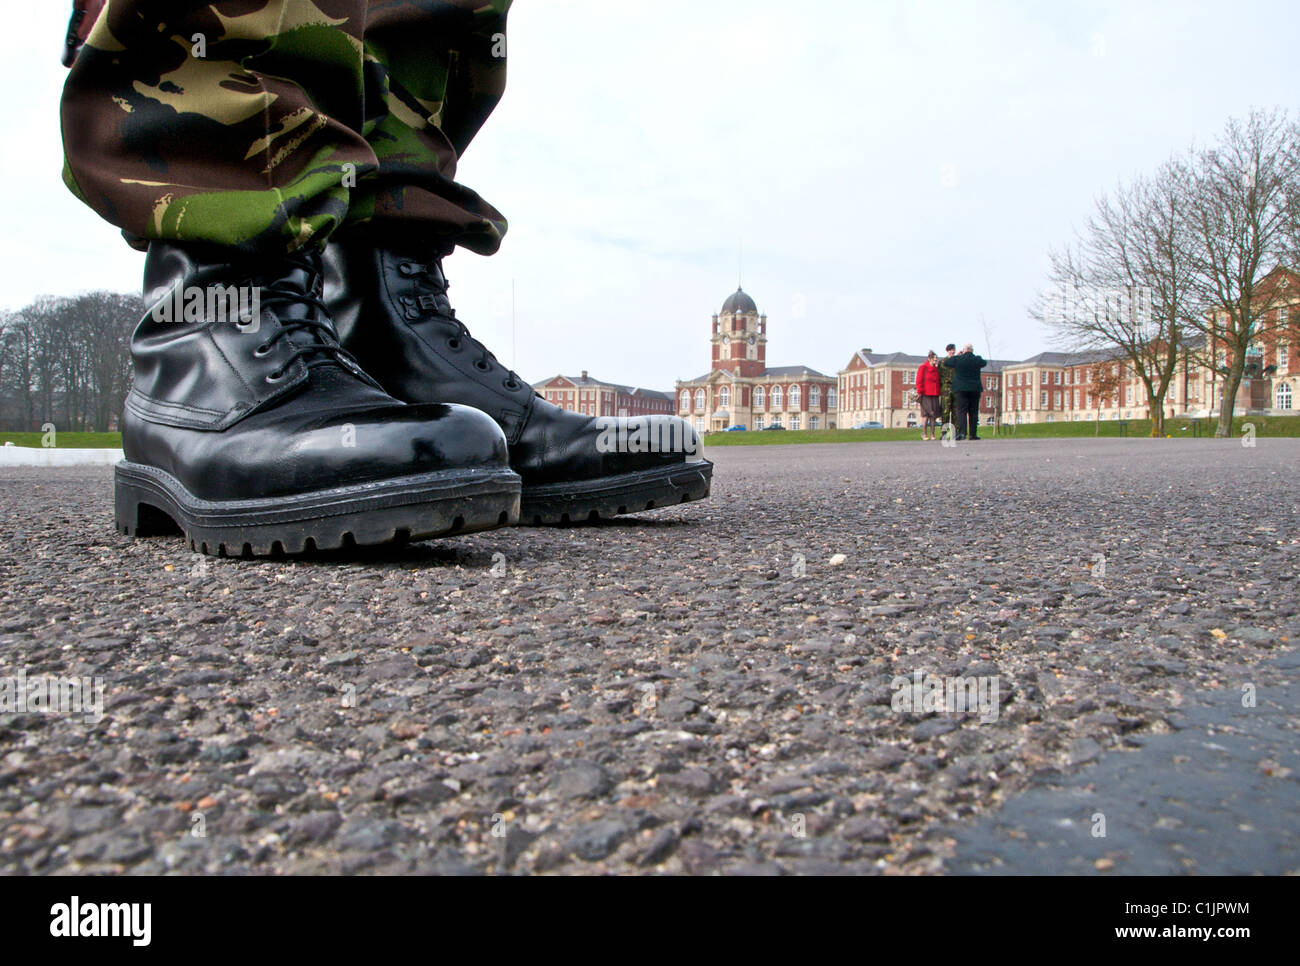 A soldier's boots on the Parade Ground of the Royal Military Academy ...